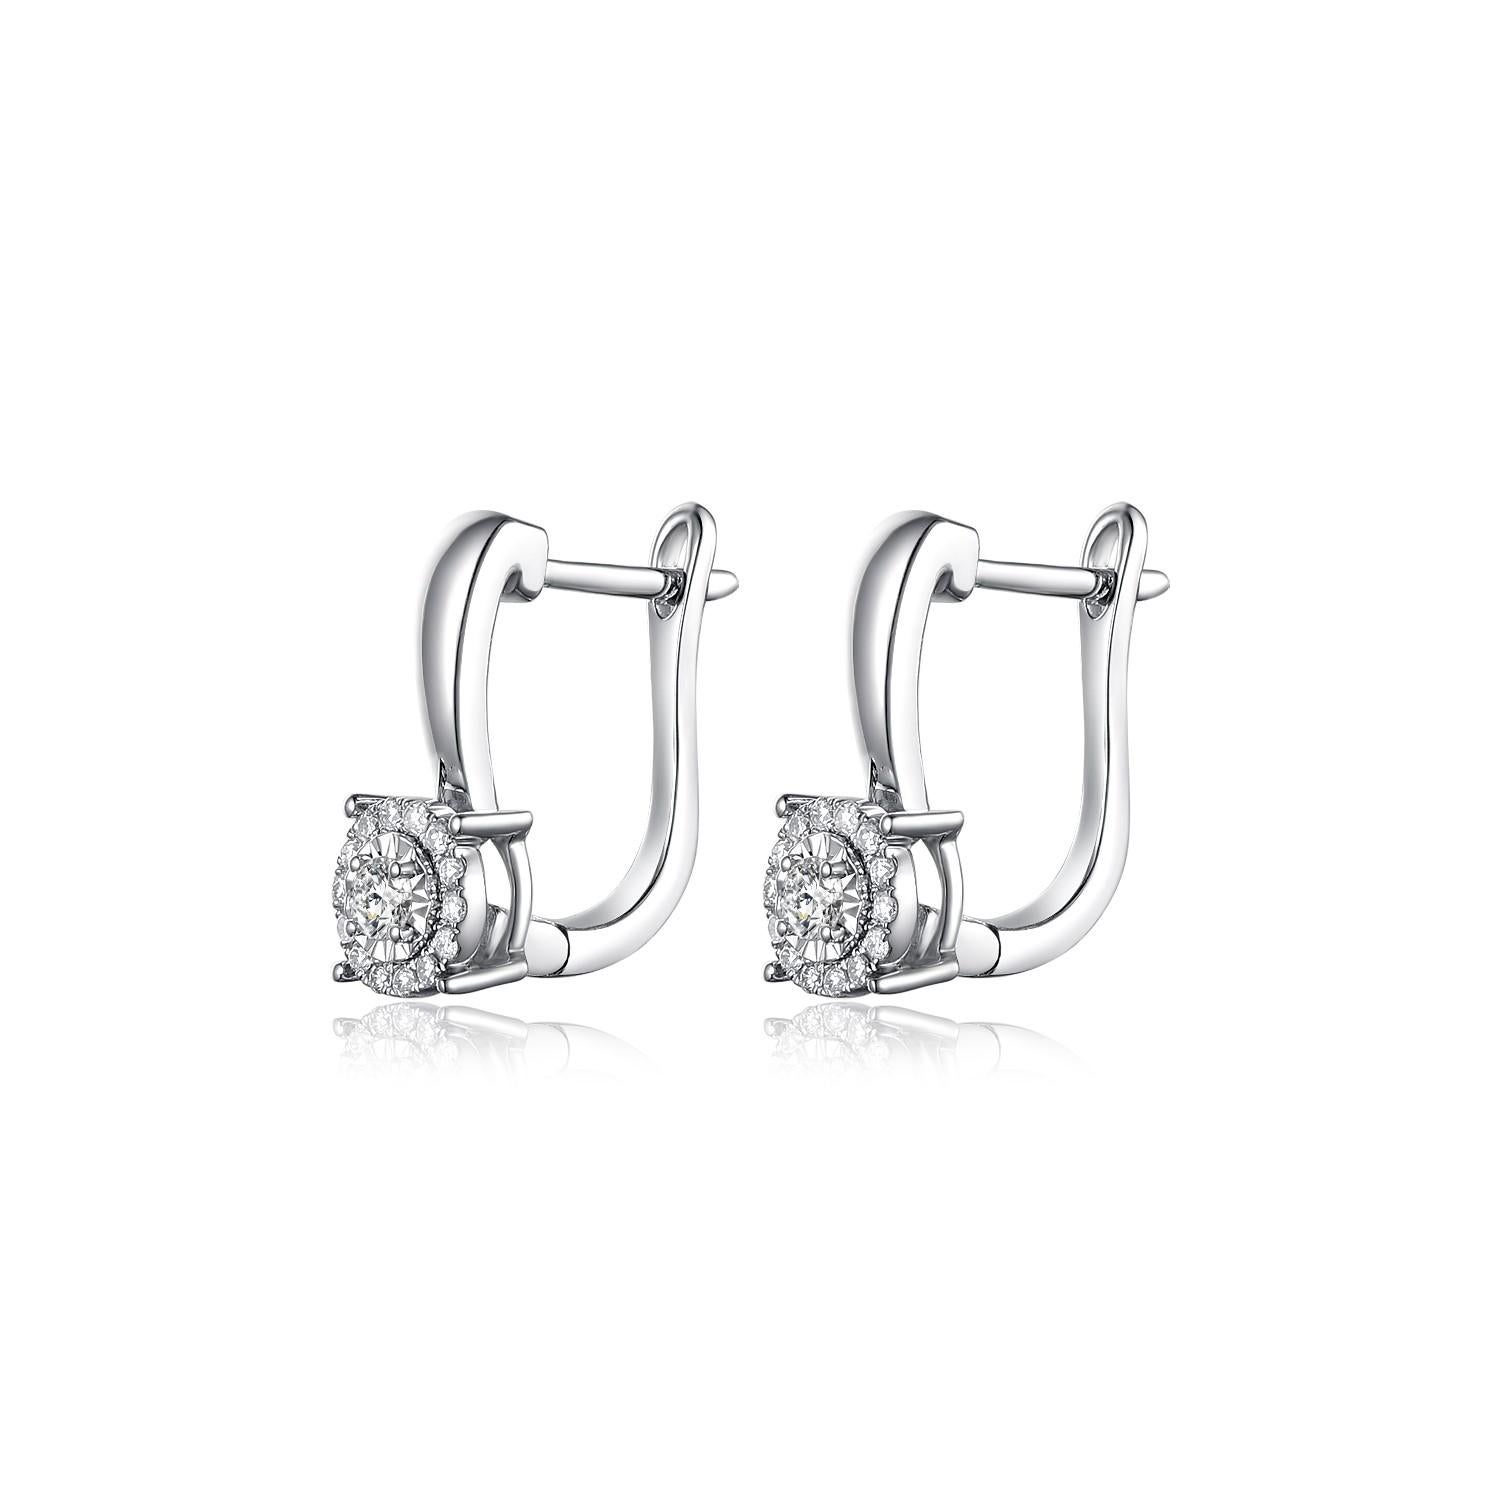 This earrings feature two 0.05 carat diamond on each side, the center stone is surrounded by a diamond halo. Earrings are set in 18 karat white gold. The earrings are very subtle and great for everyday-use. Would highly recommend for holiday gift.